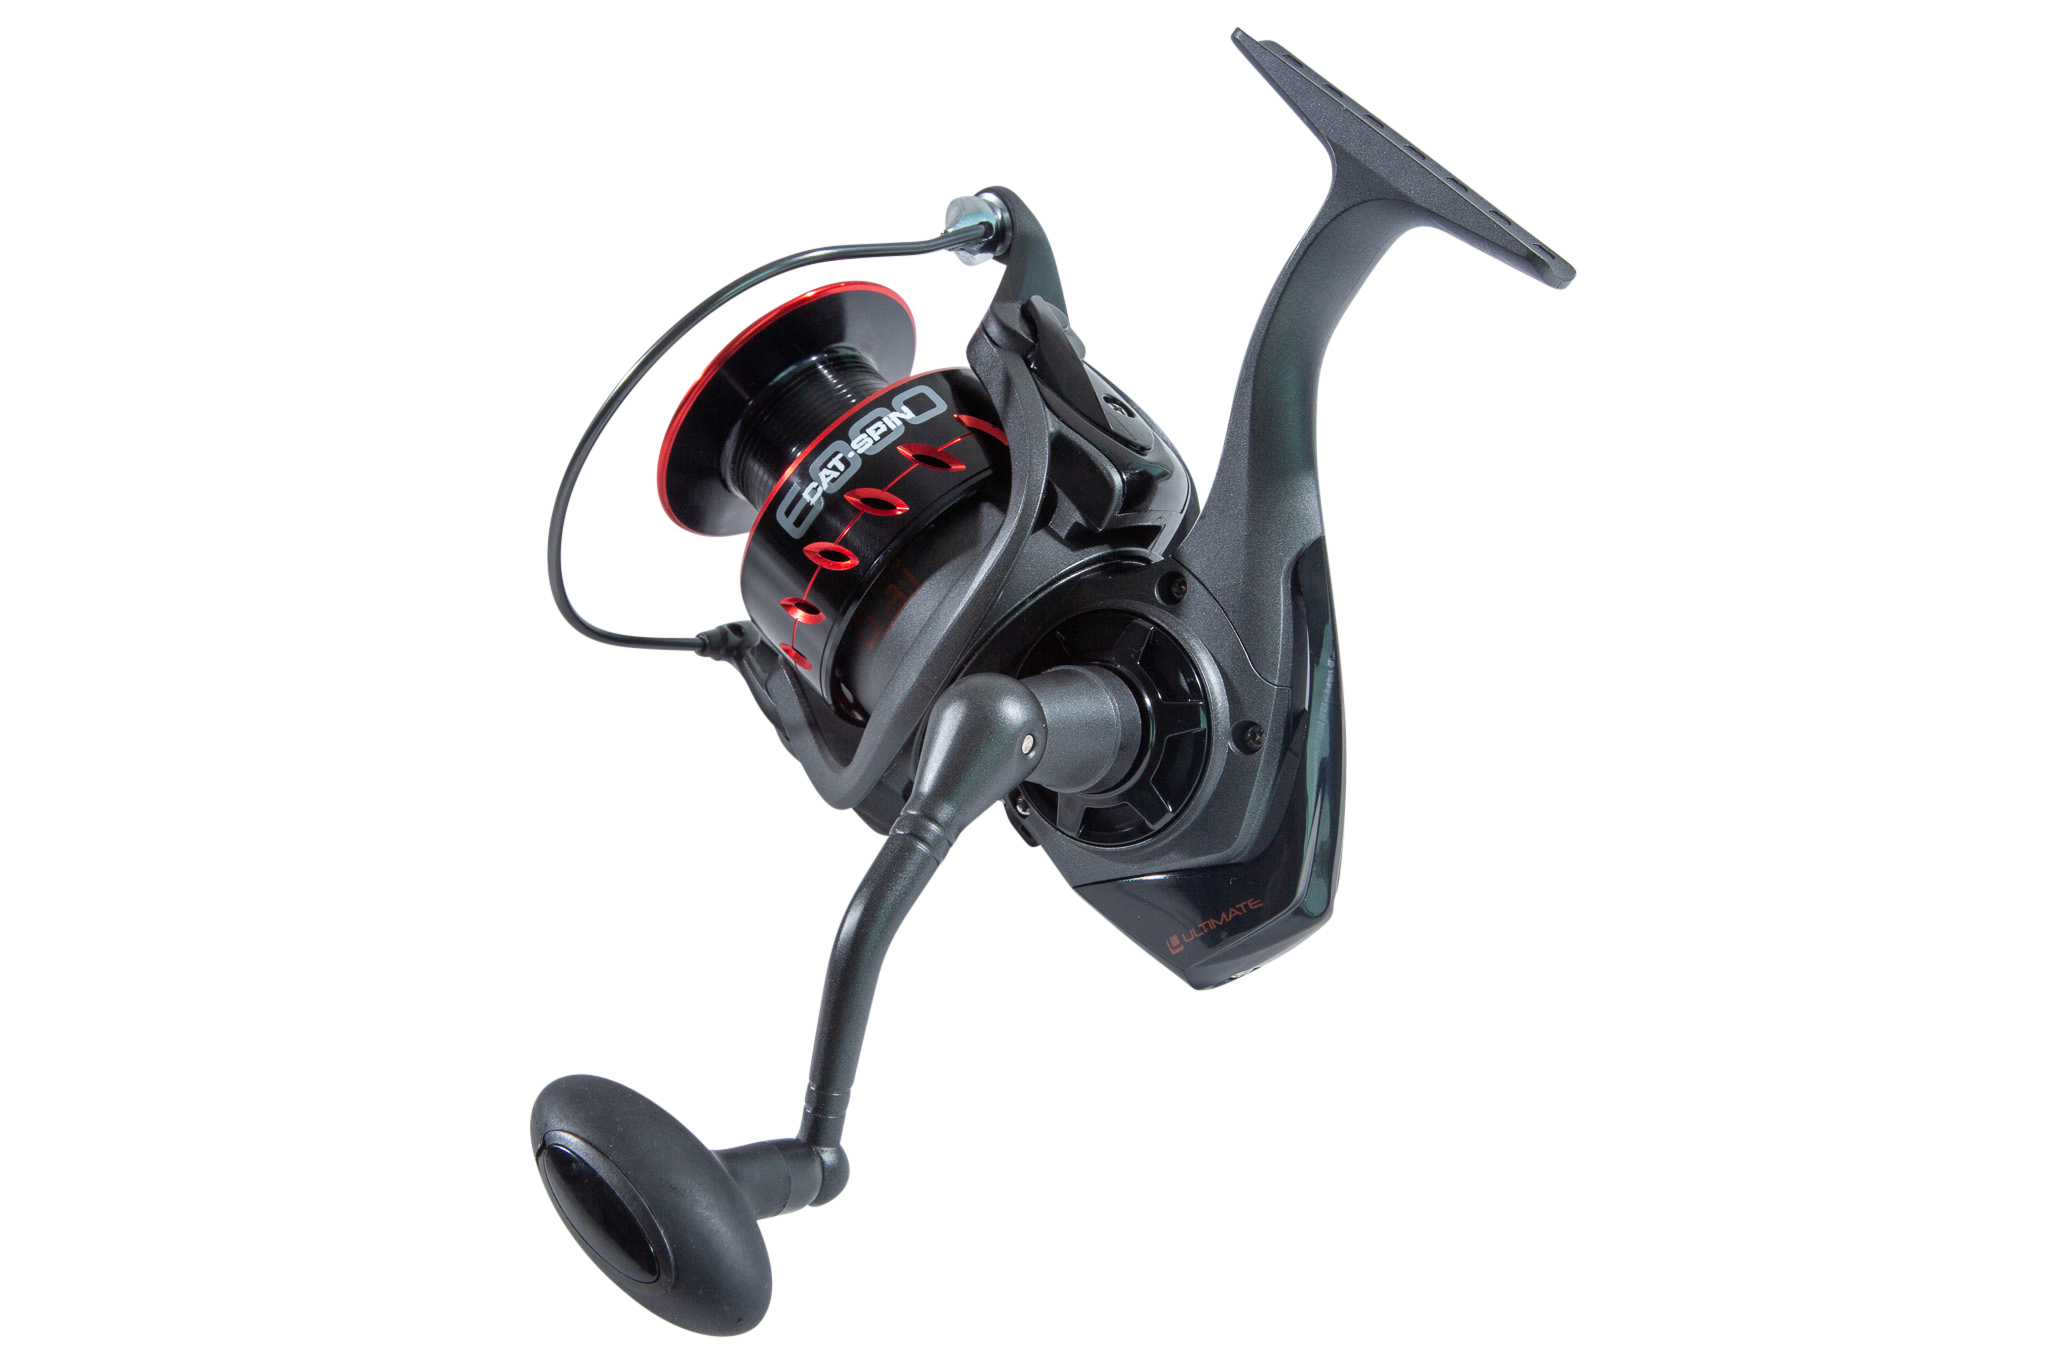 Fishing with Cheap Catfish Reels 